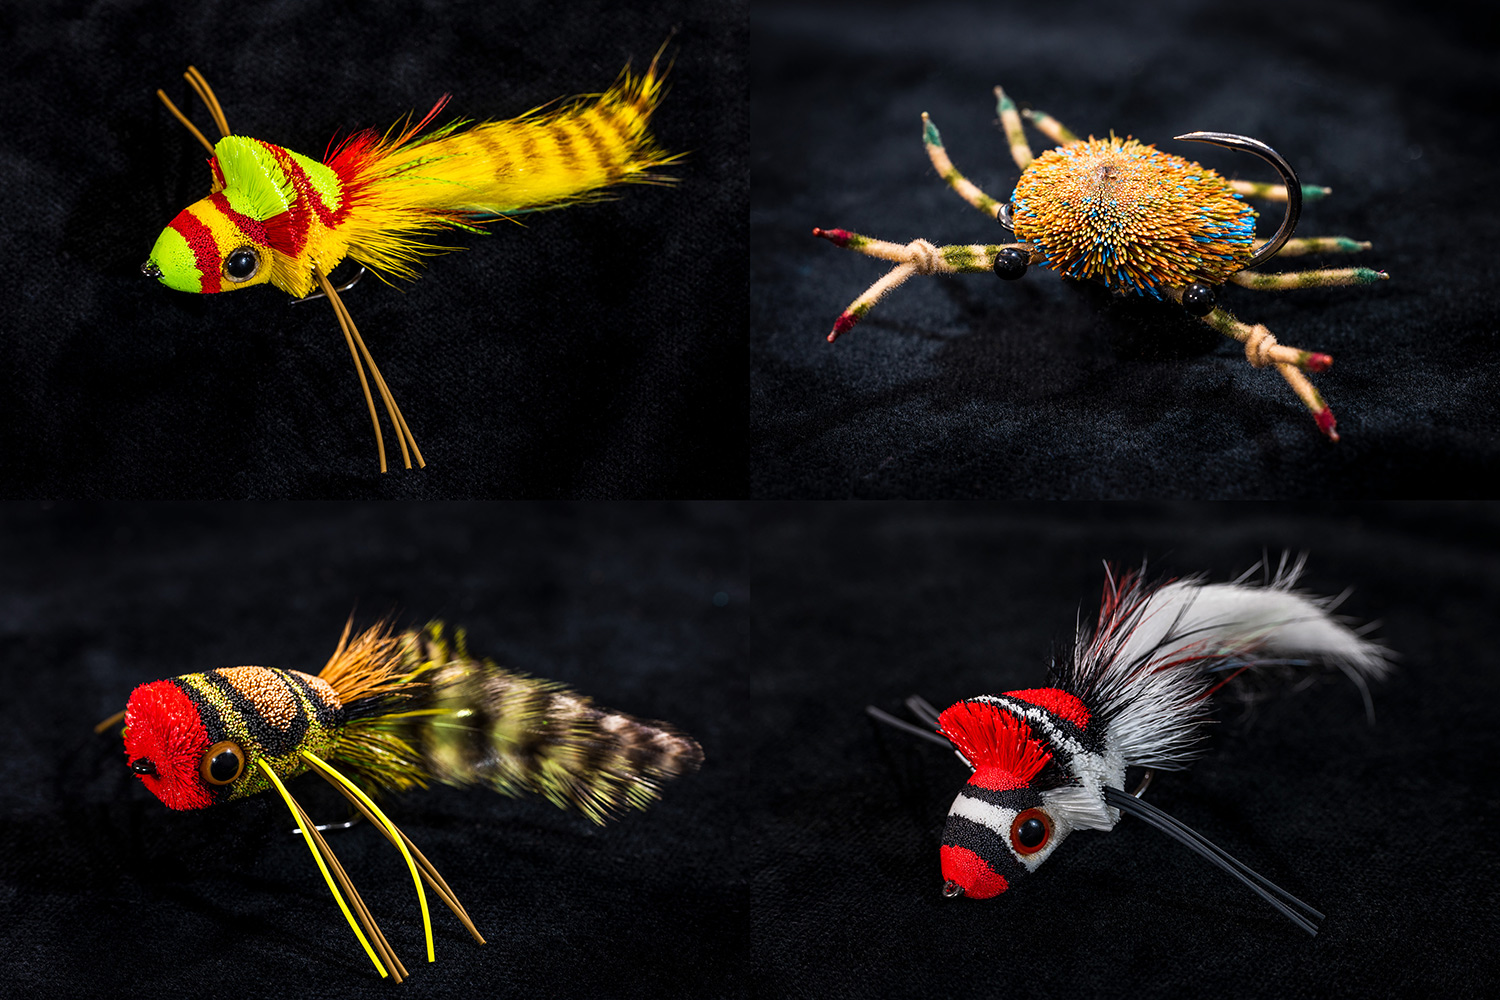 four fishing flies tied by Brandon Bailes, one of them in the shape of a crab